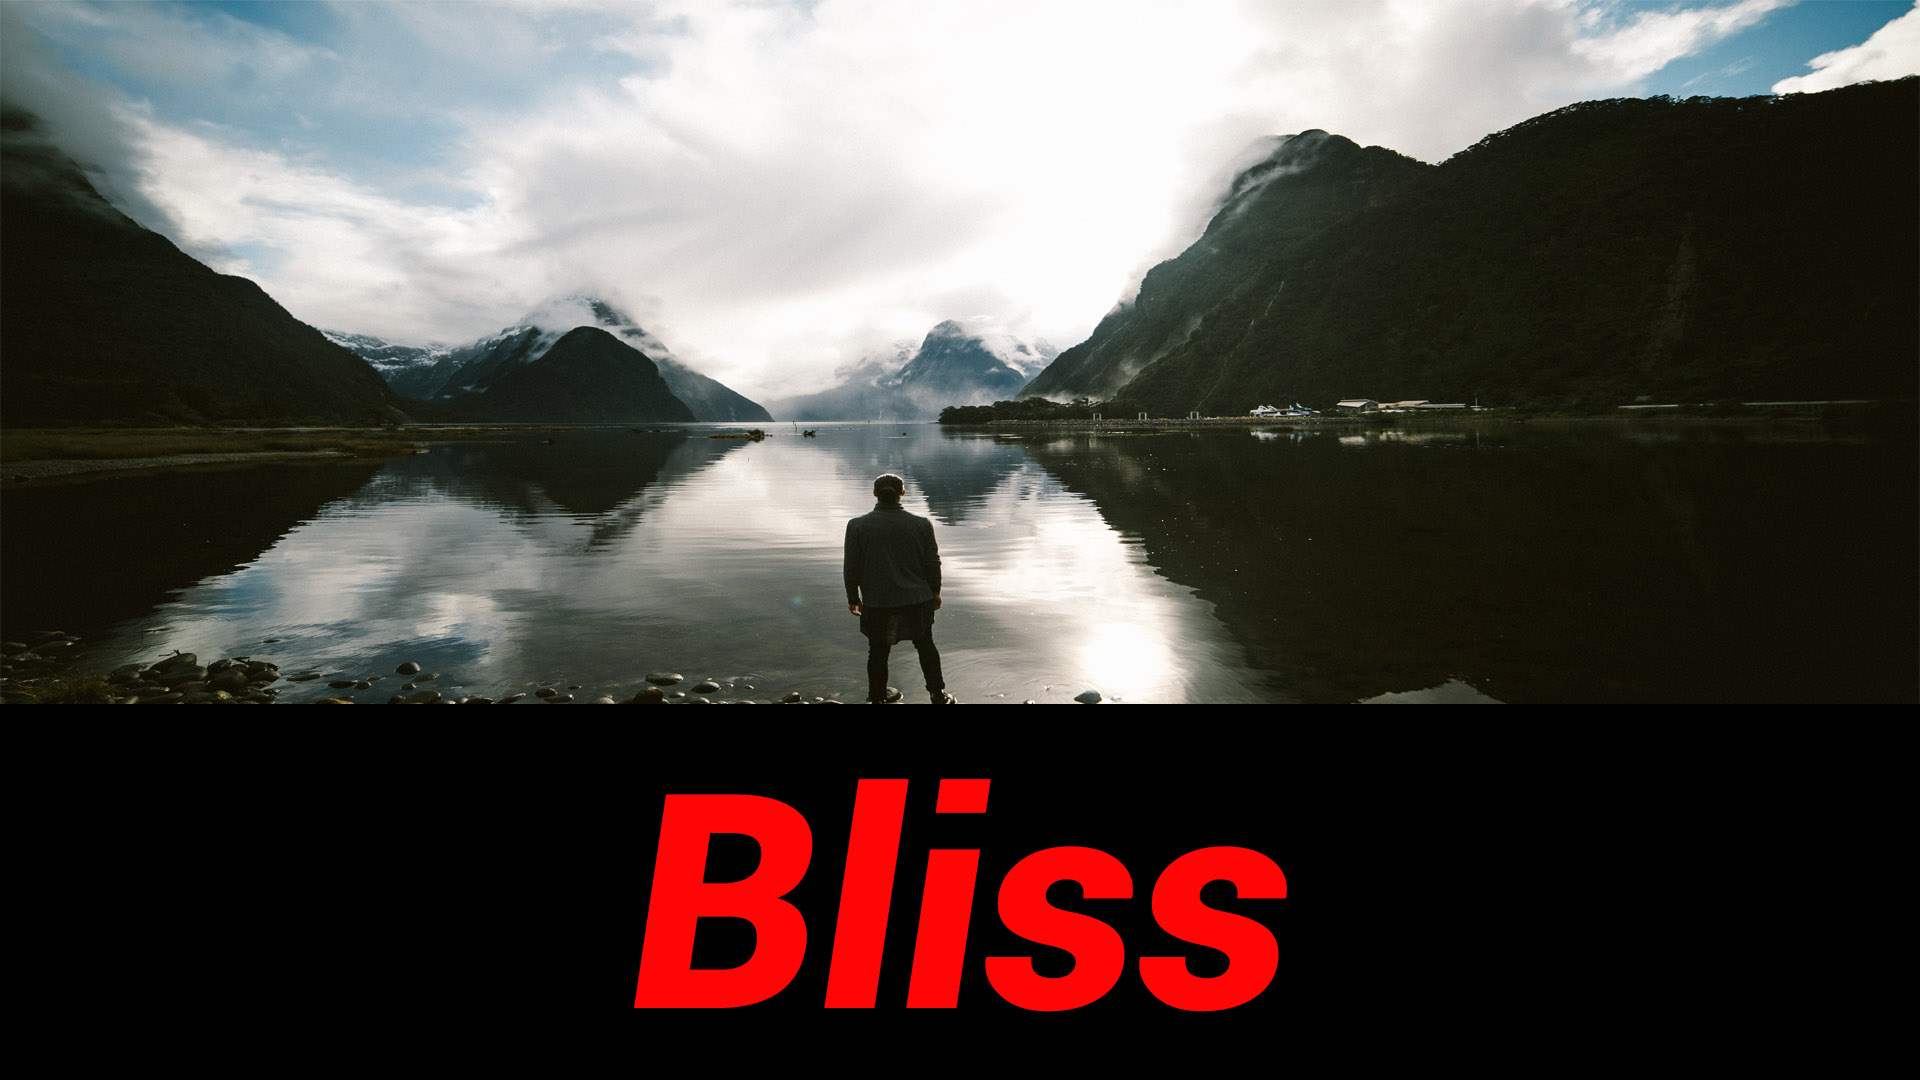 Bliss, a short story by Spud Murphy